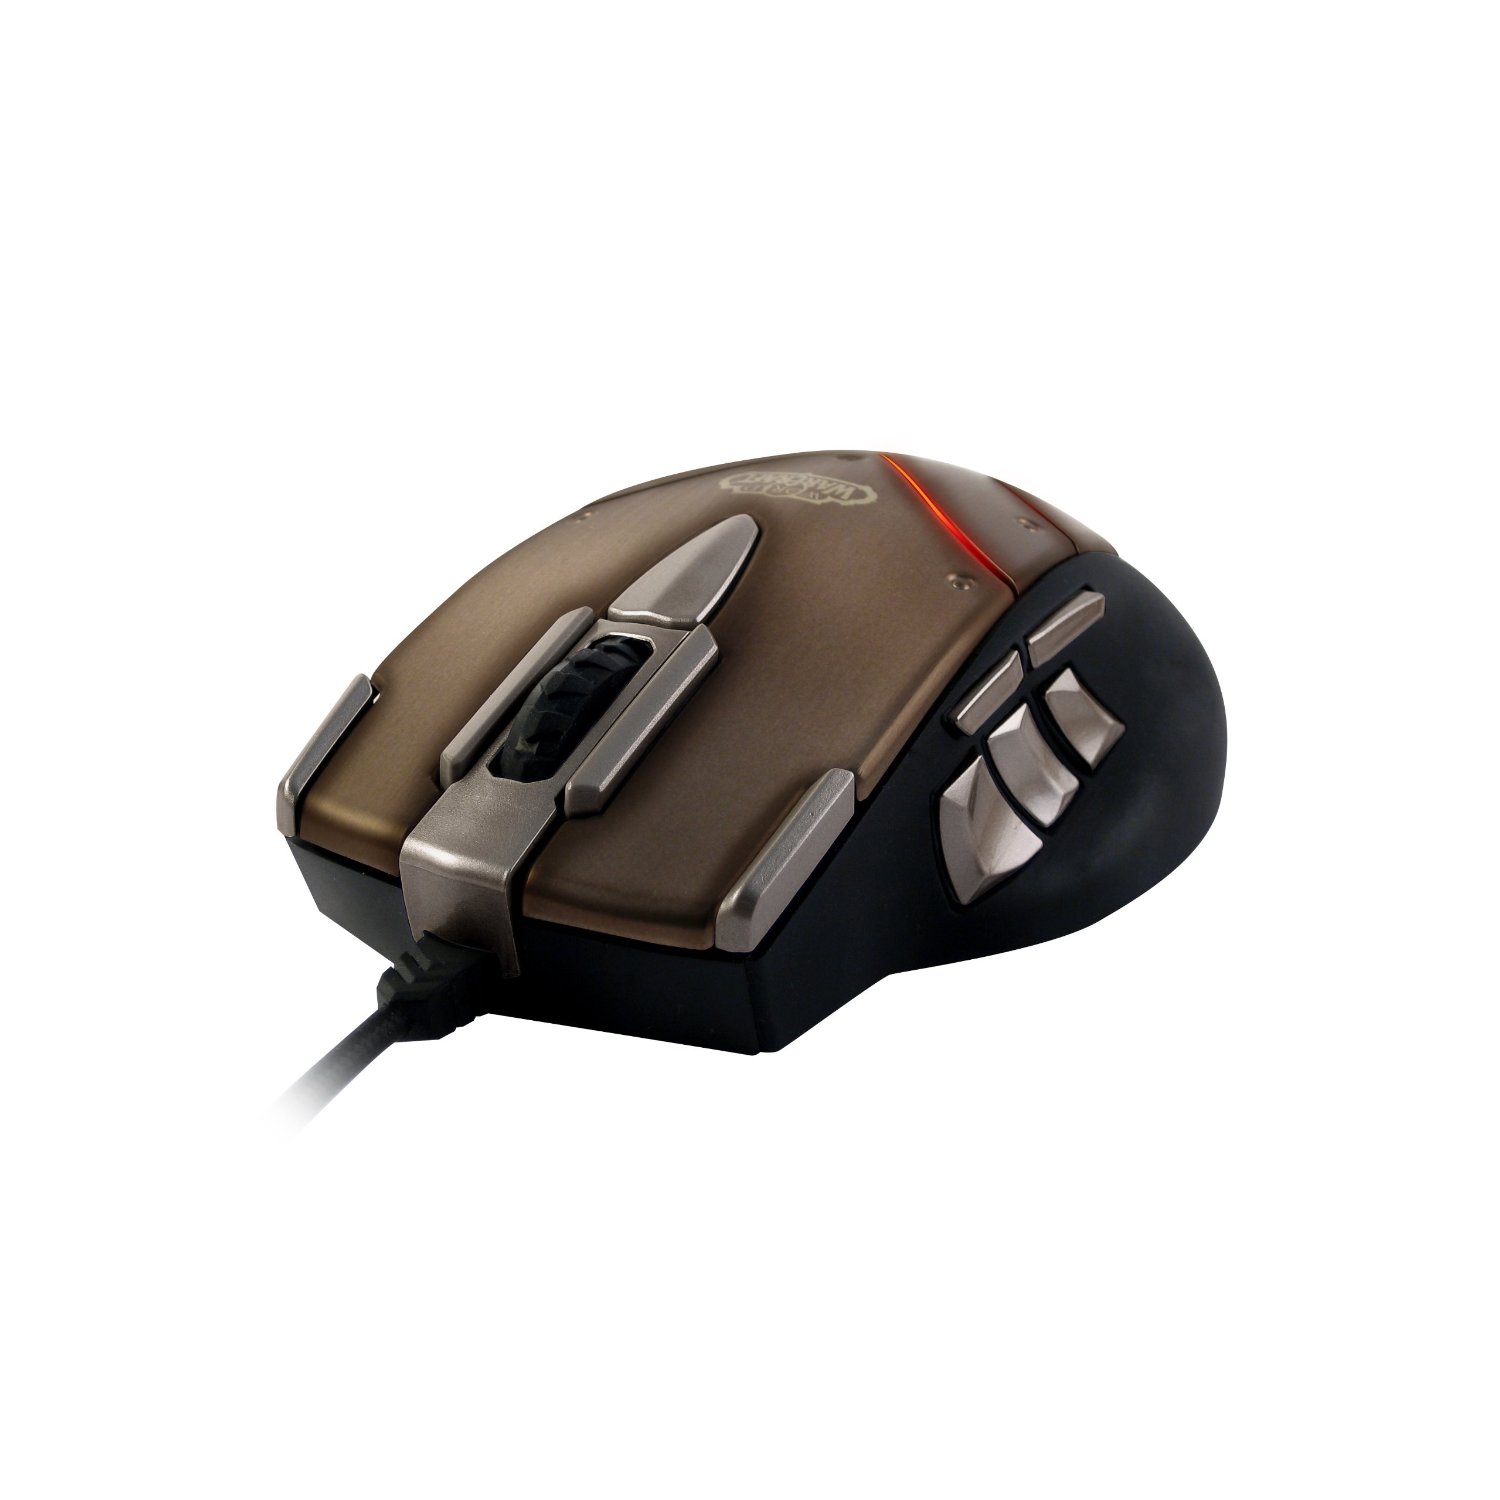 steelseries world of warcraft cataclysm mmo gaming mouse